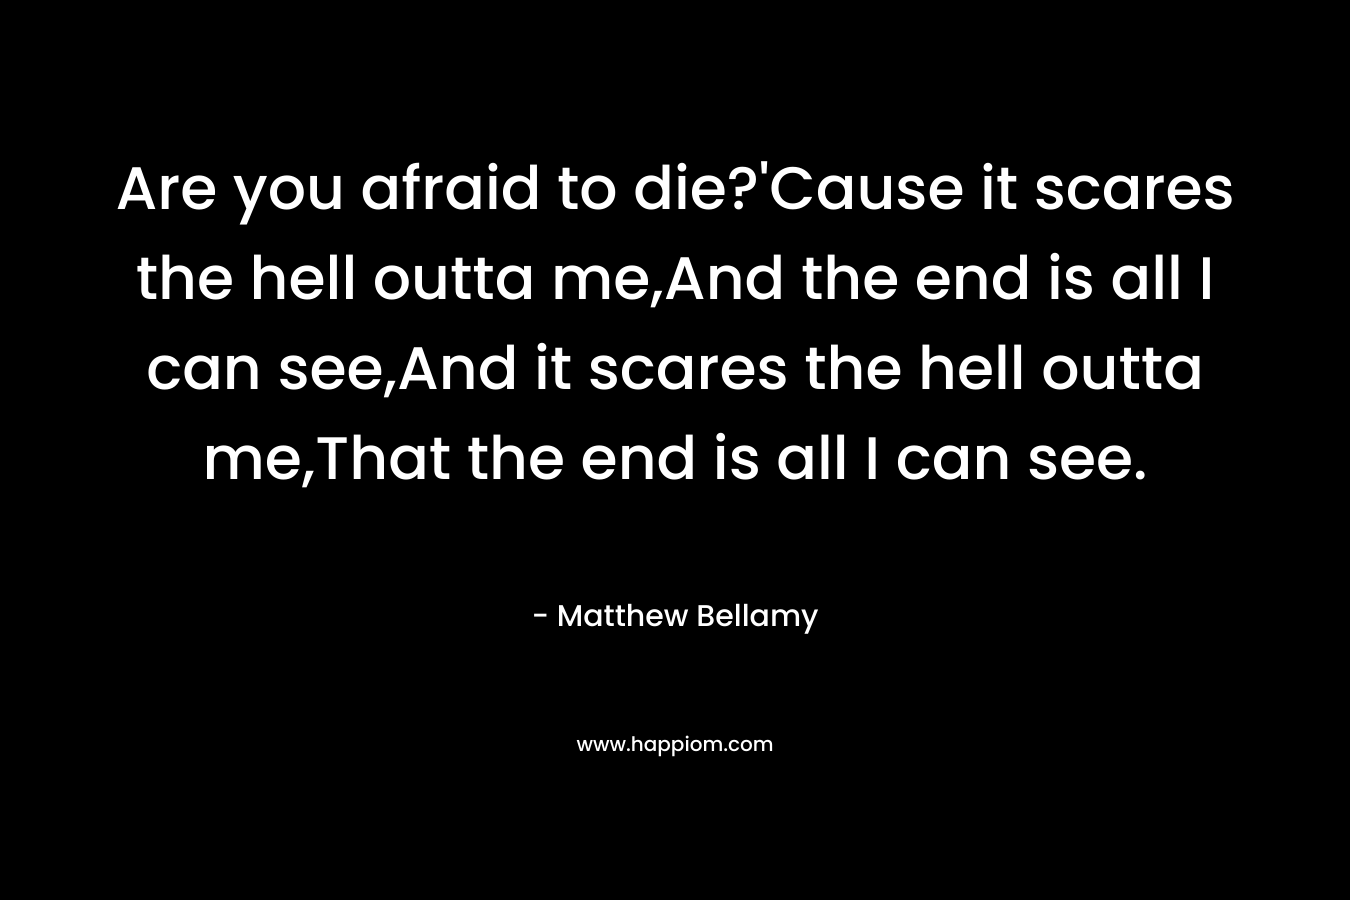 Are you afraid to die?’Cause it scares the hell outta me,And the end is all I can see,And it scares the hell outta me,That the end is all I can see. – Matthew Bellamy